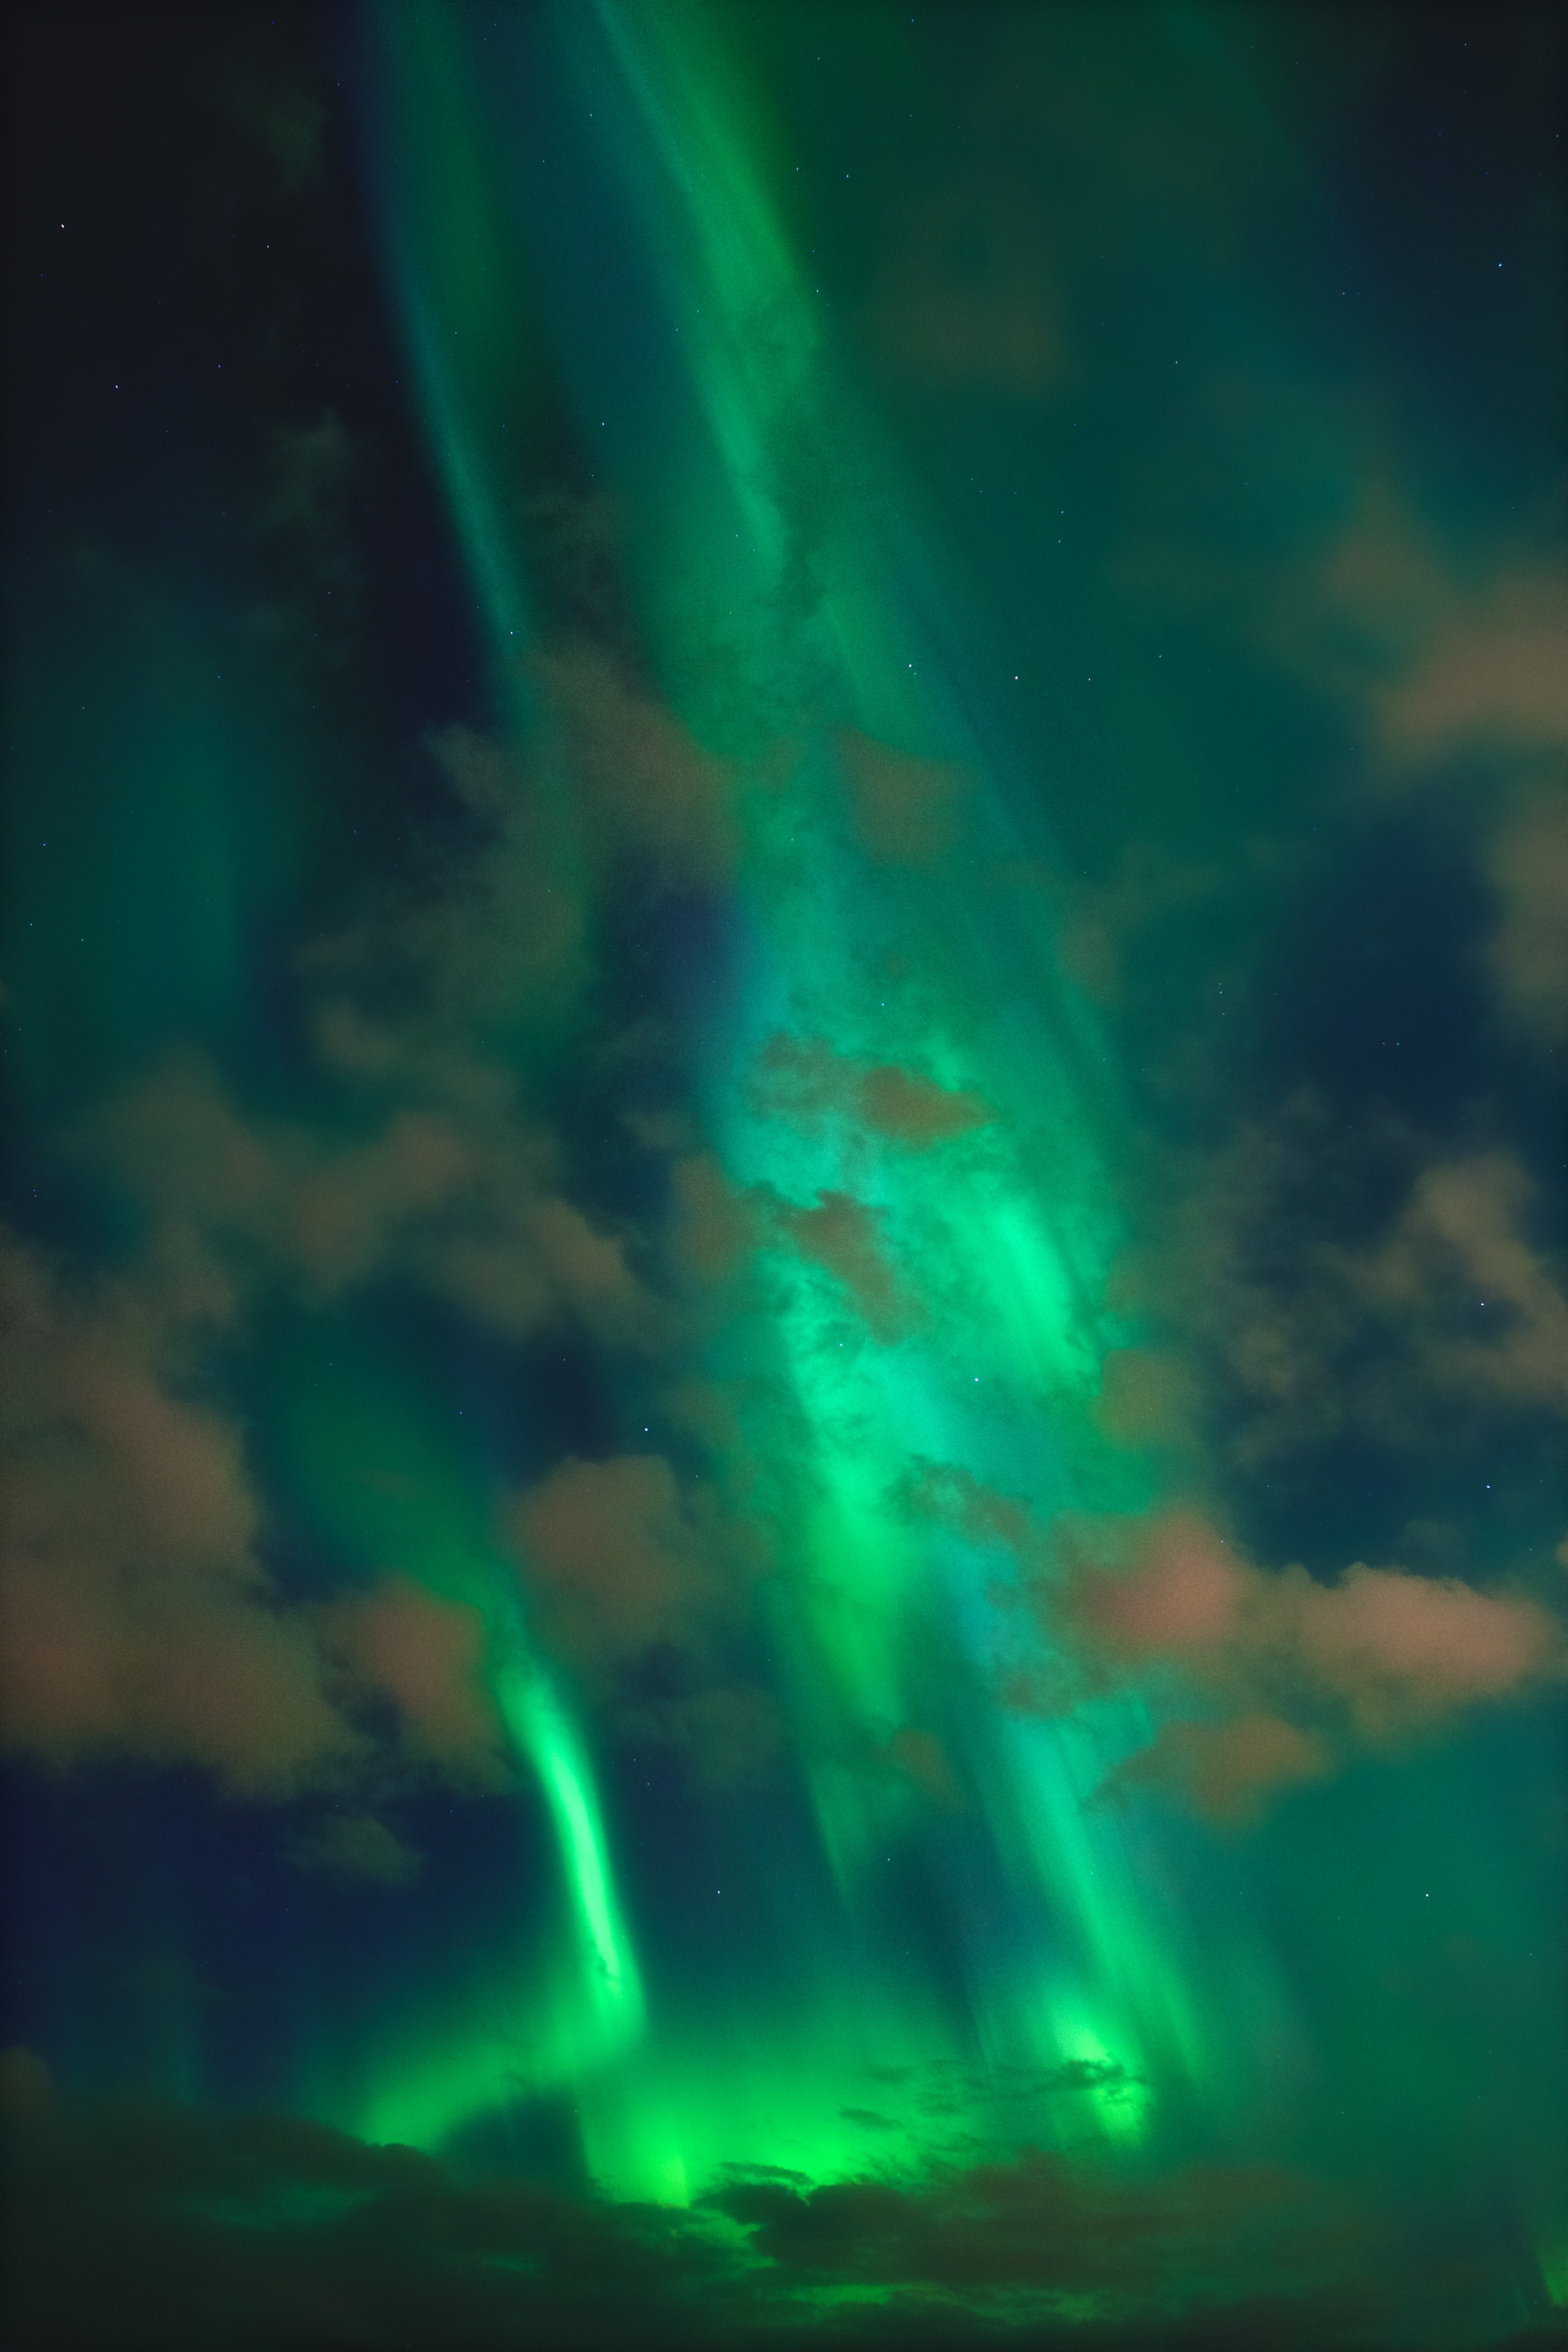 Cool Backgrounds sky, nature, clouds, aurora borealis Northern Lights